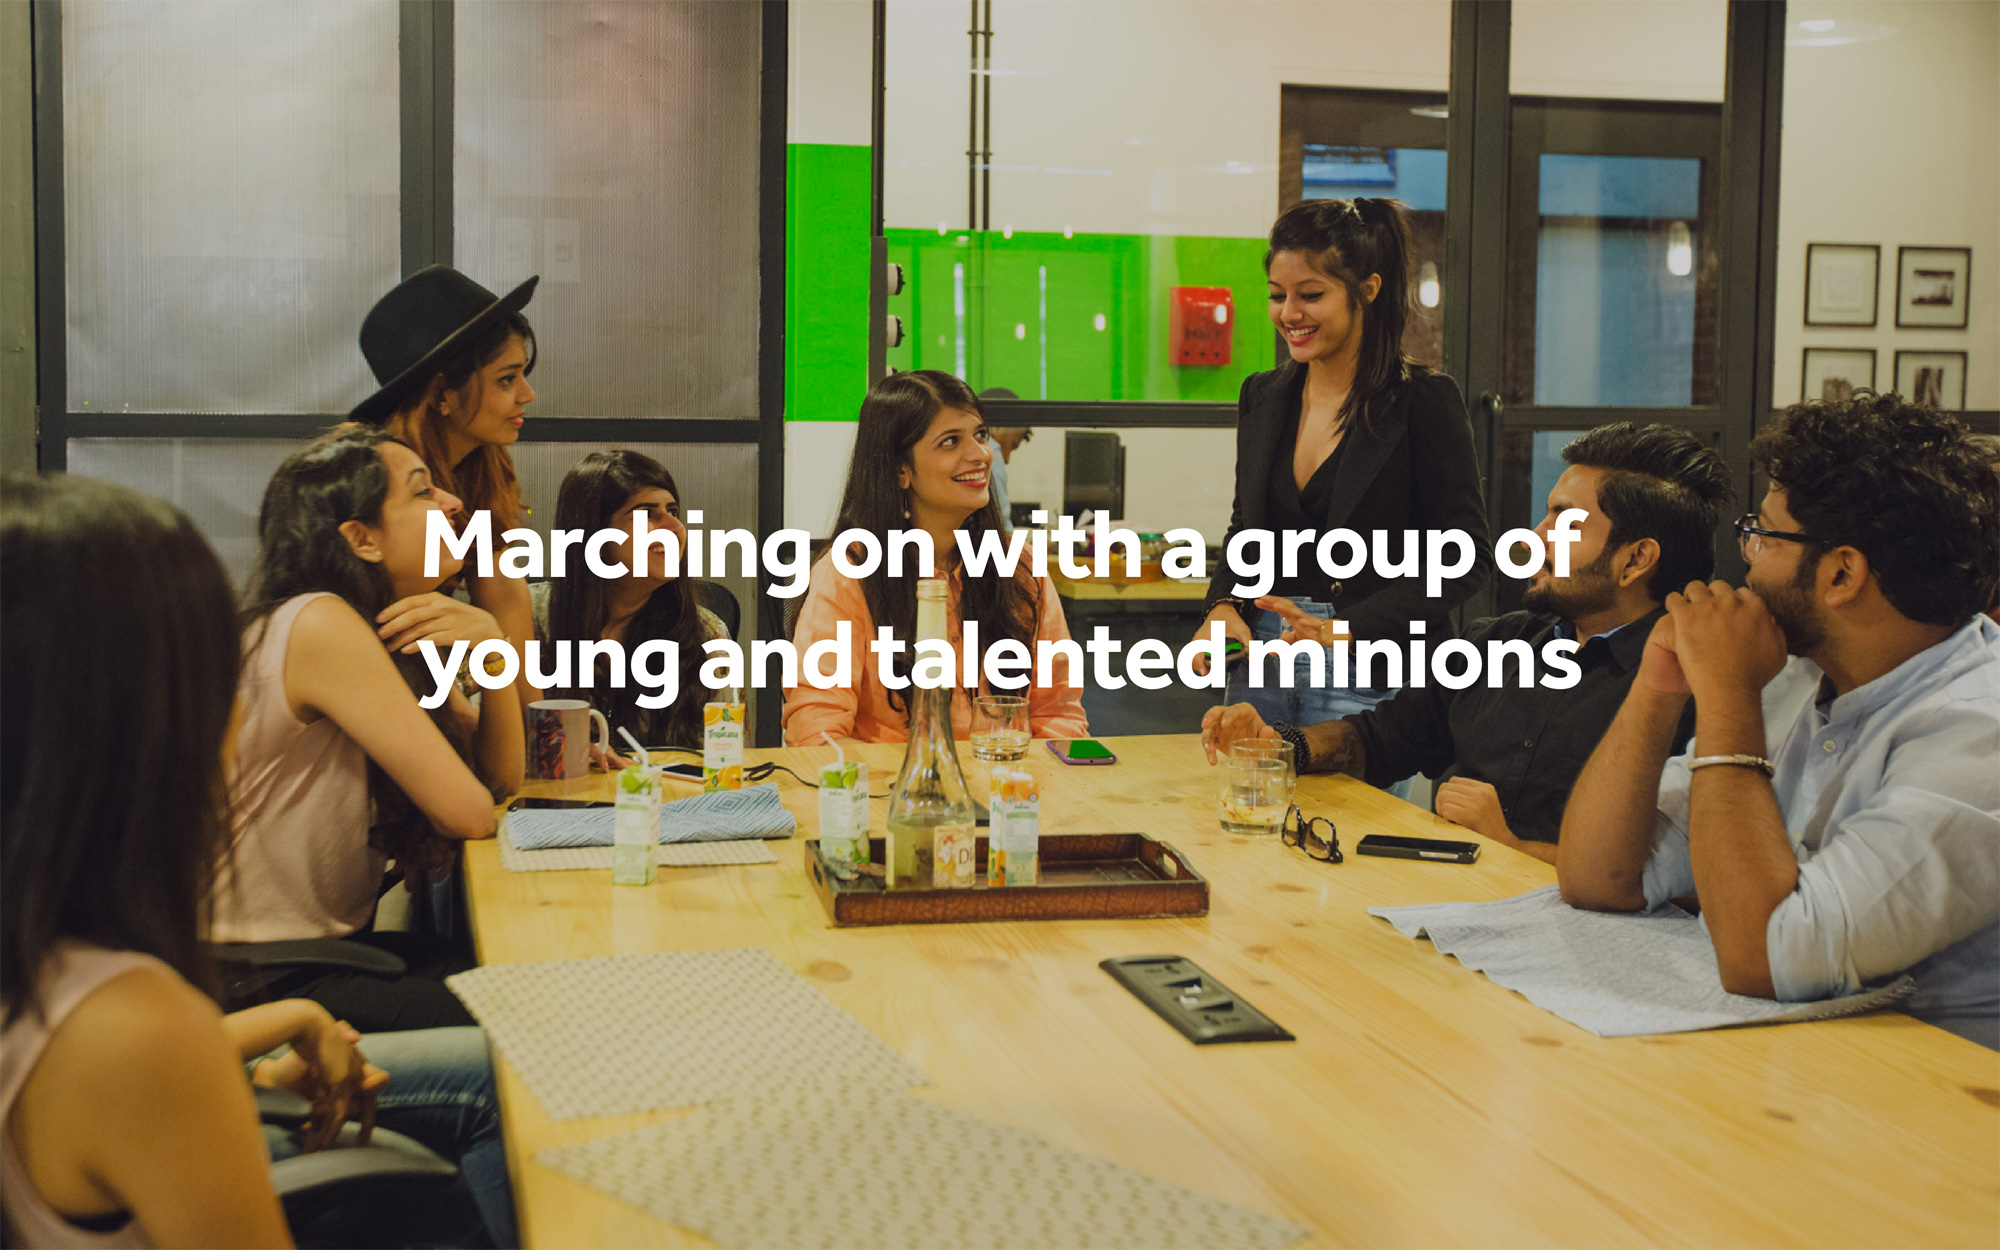 Marching on with a group of young (avg. age 23) and talented minions